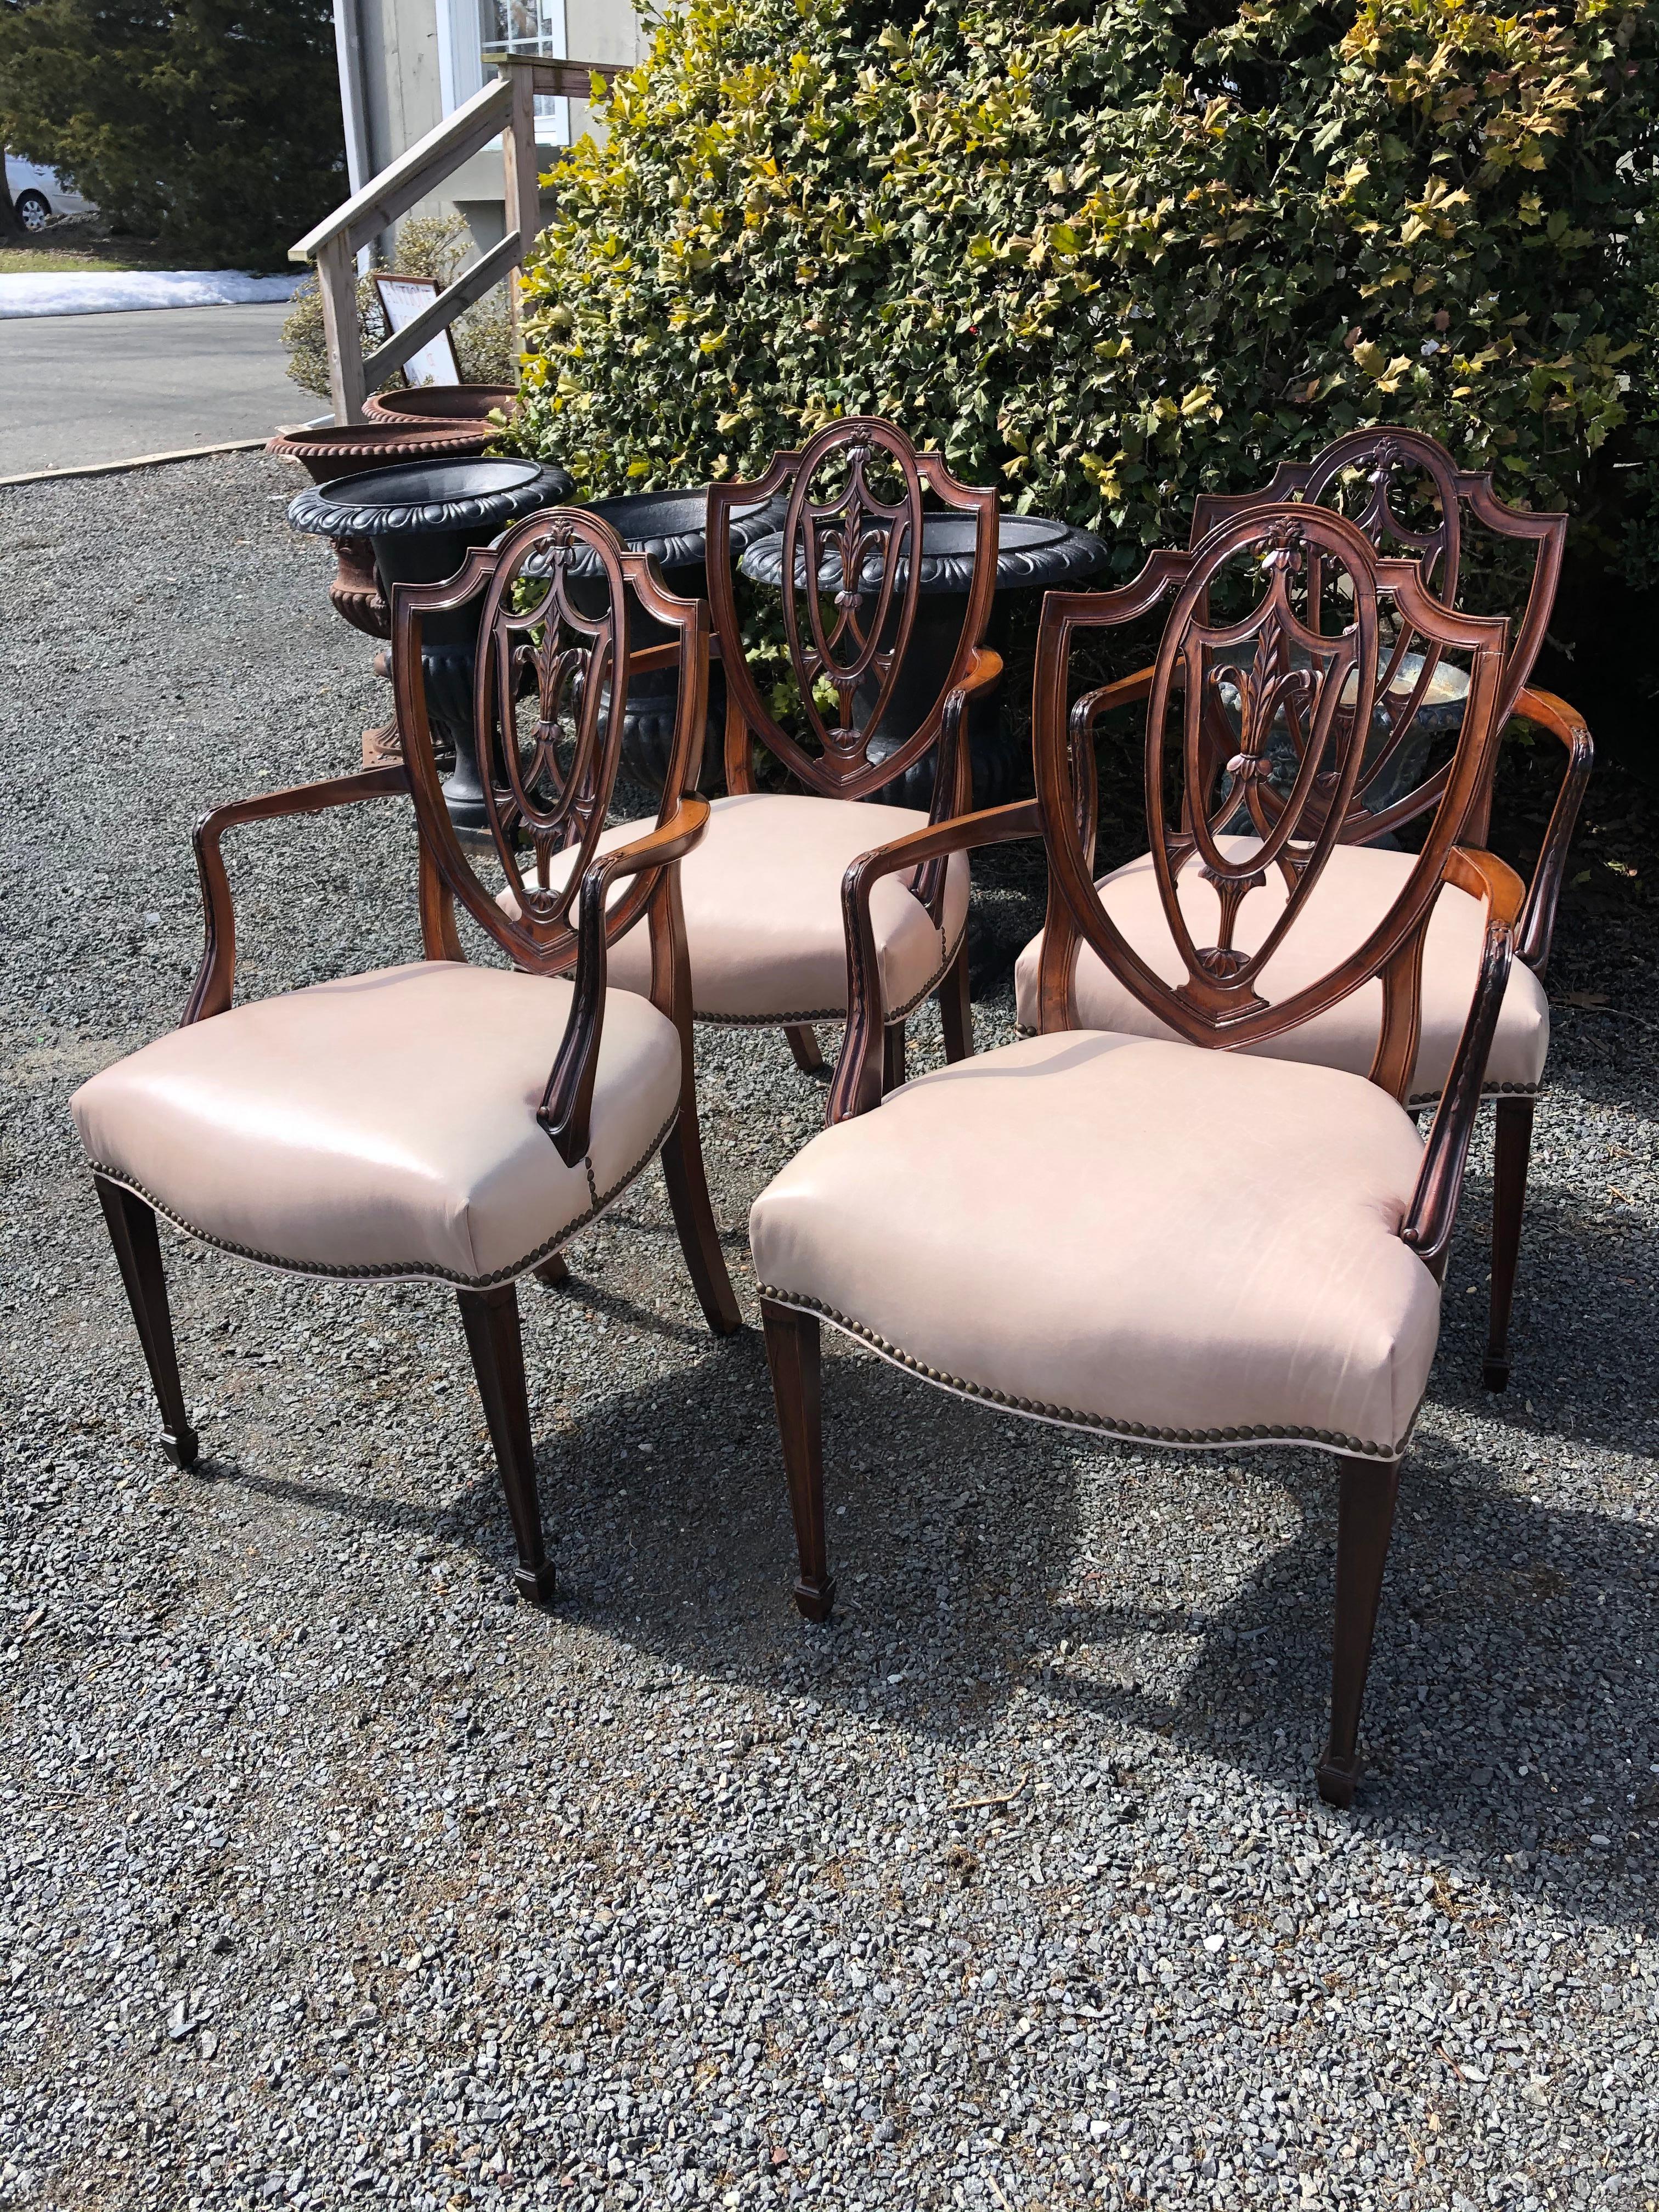 Utterly sublime and refined set of 4 elegant antique mahogany armchairs having carved wood shield backs, delicate curved arms and tapered legs, updated with glamorous blush leather seats finished with nailheads. 
Measures: Seat height 18
Arm